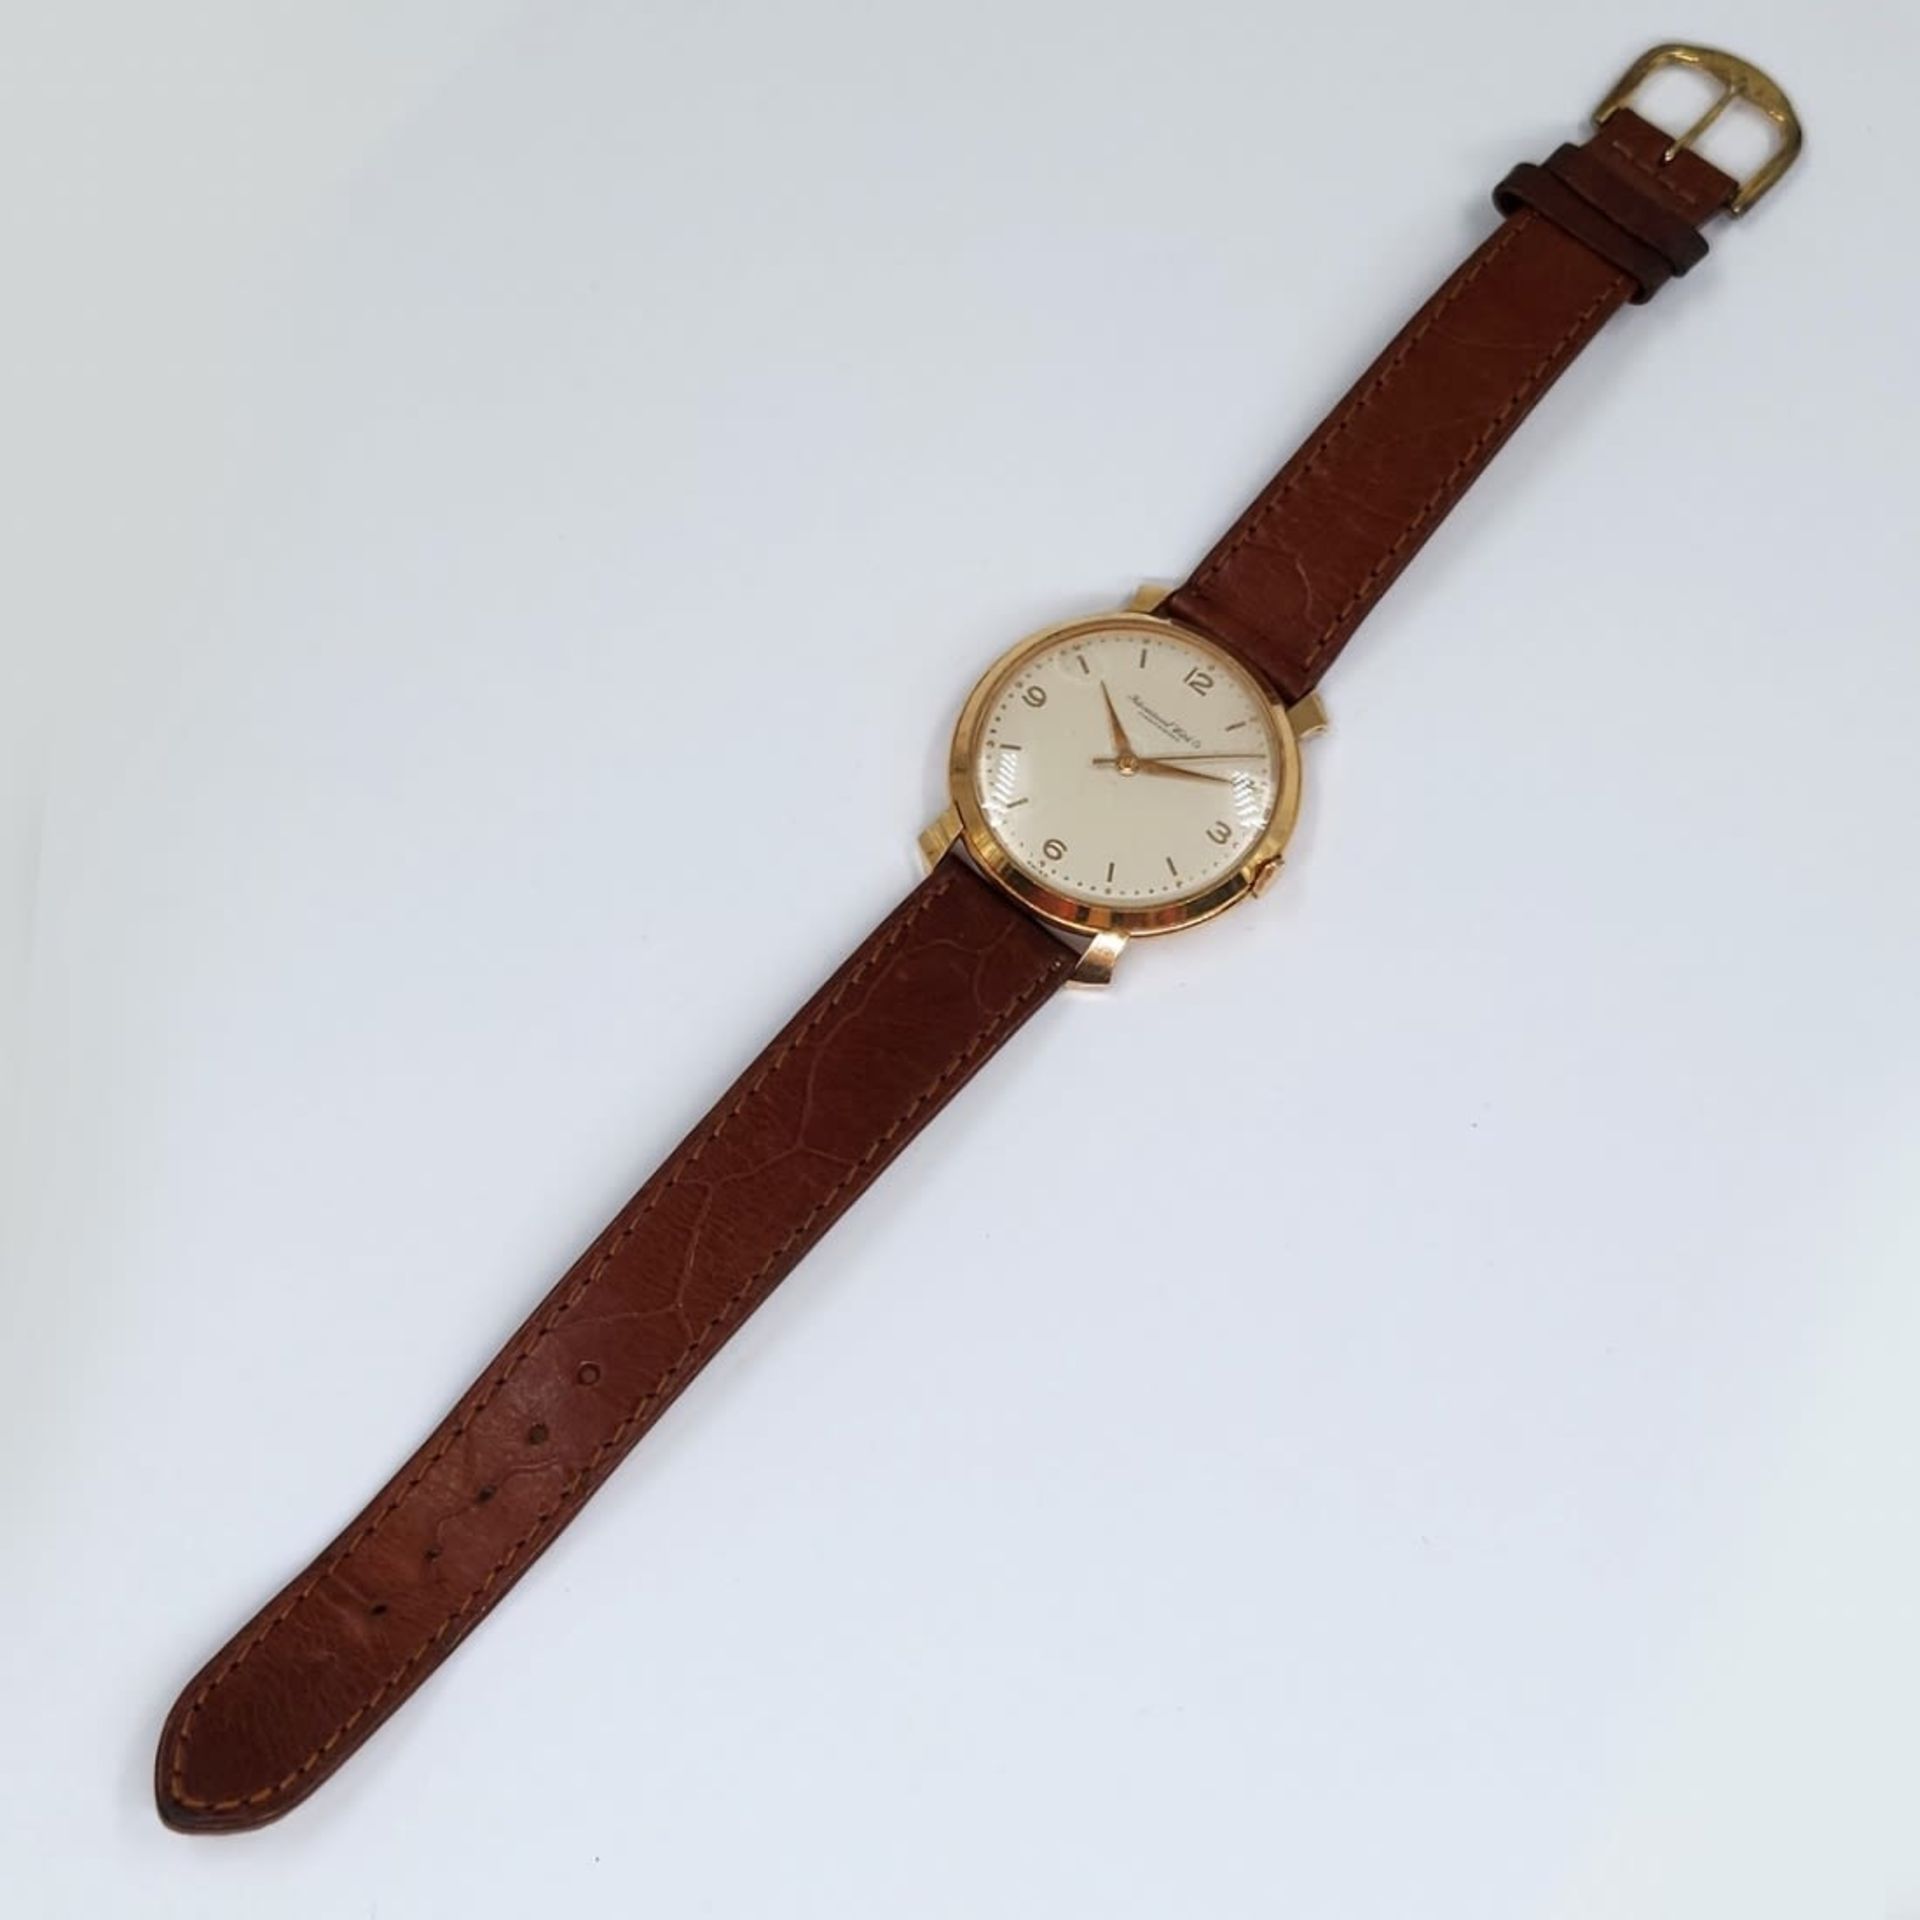 Wristwatch for men made by: 'Schaffhausen', 14k yellow gold, brown leather strap, working - Image 3 of 4